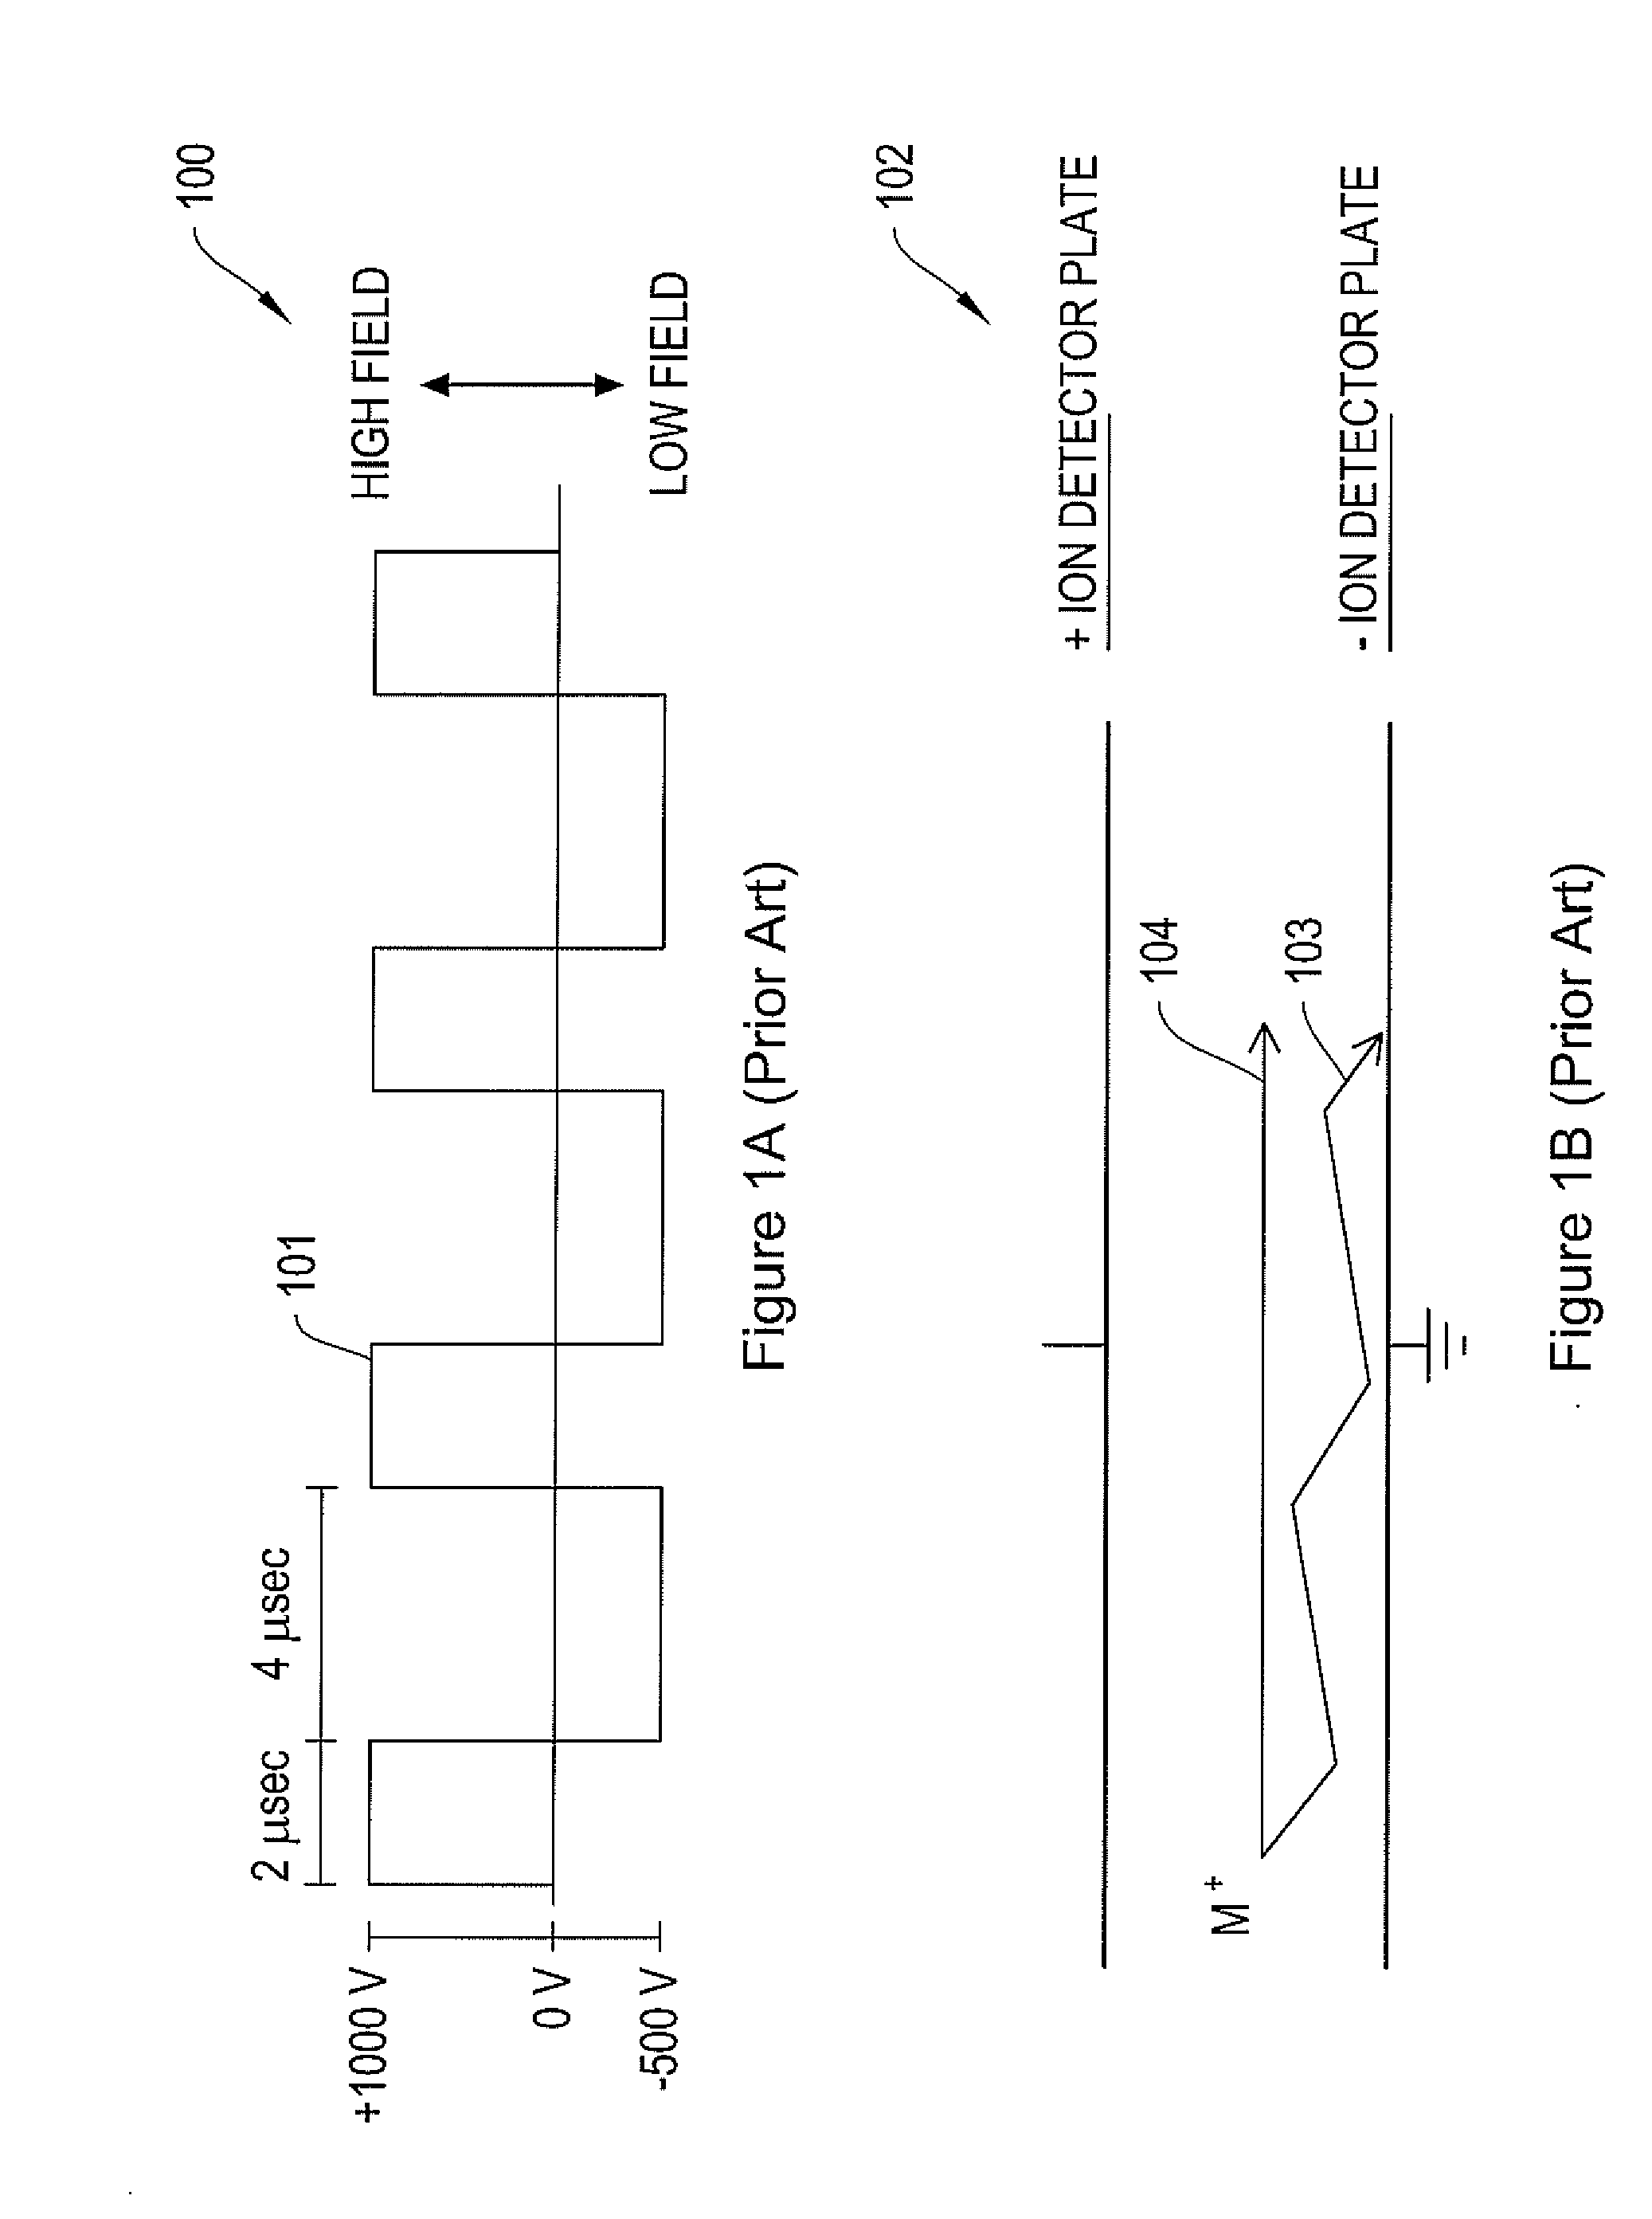 Mass analysis system with low pressure differential mobility spectrometer